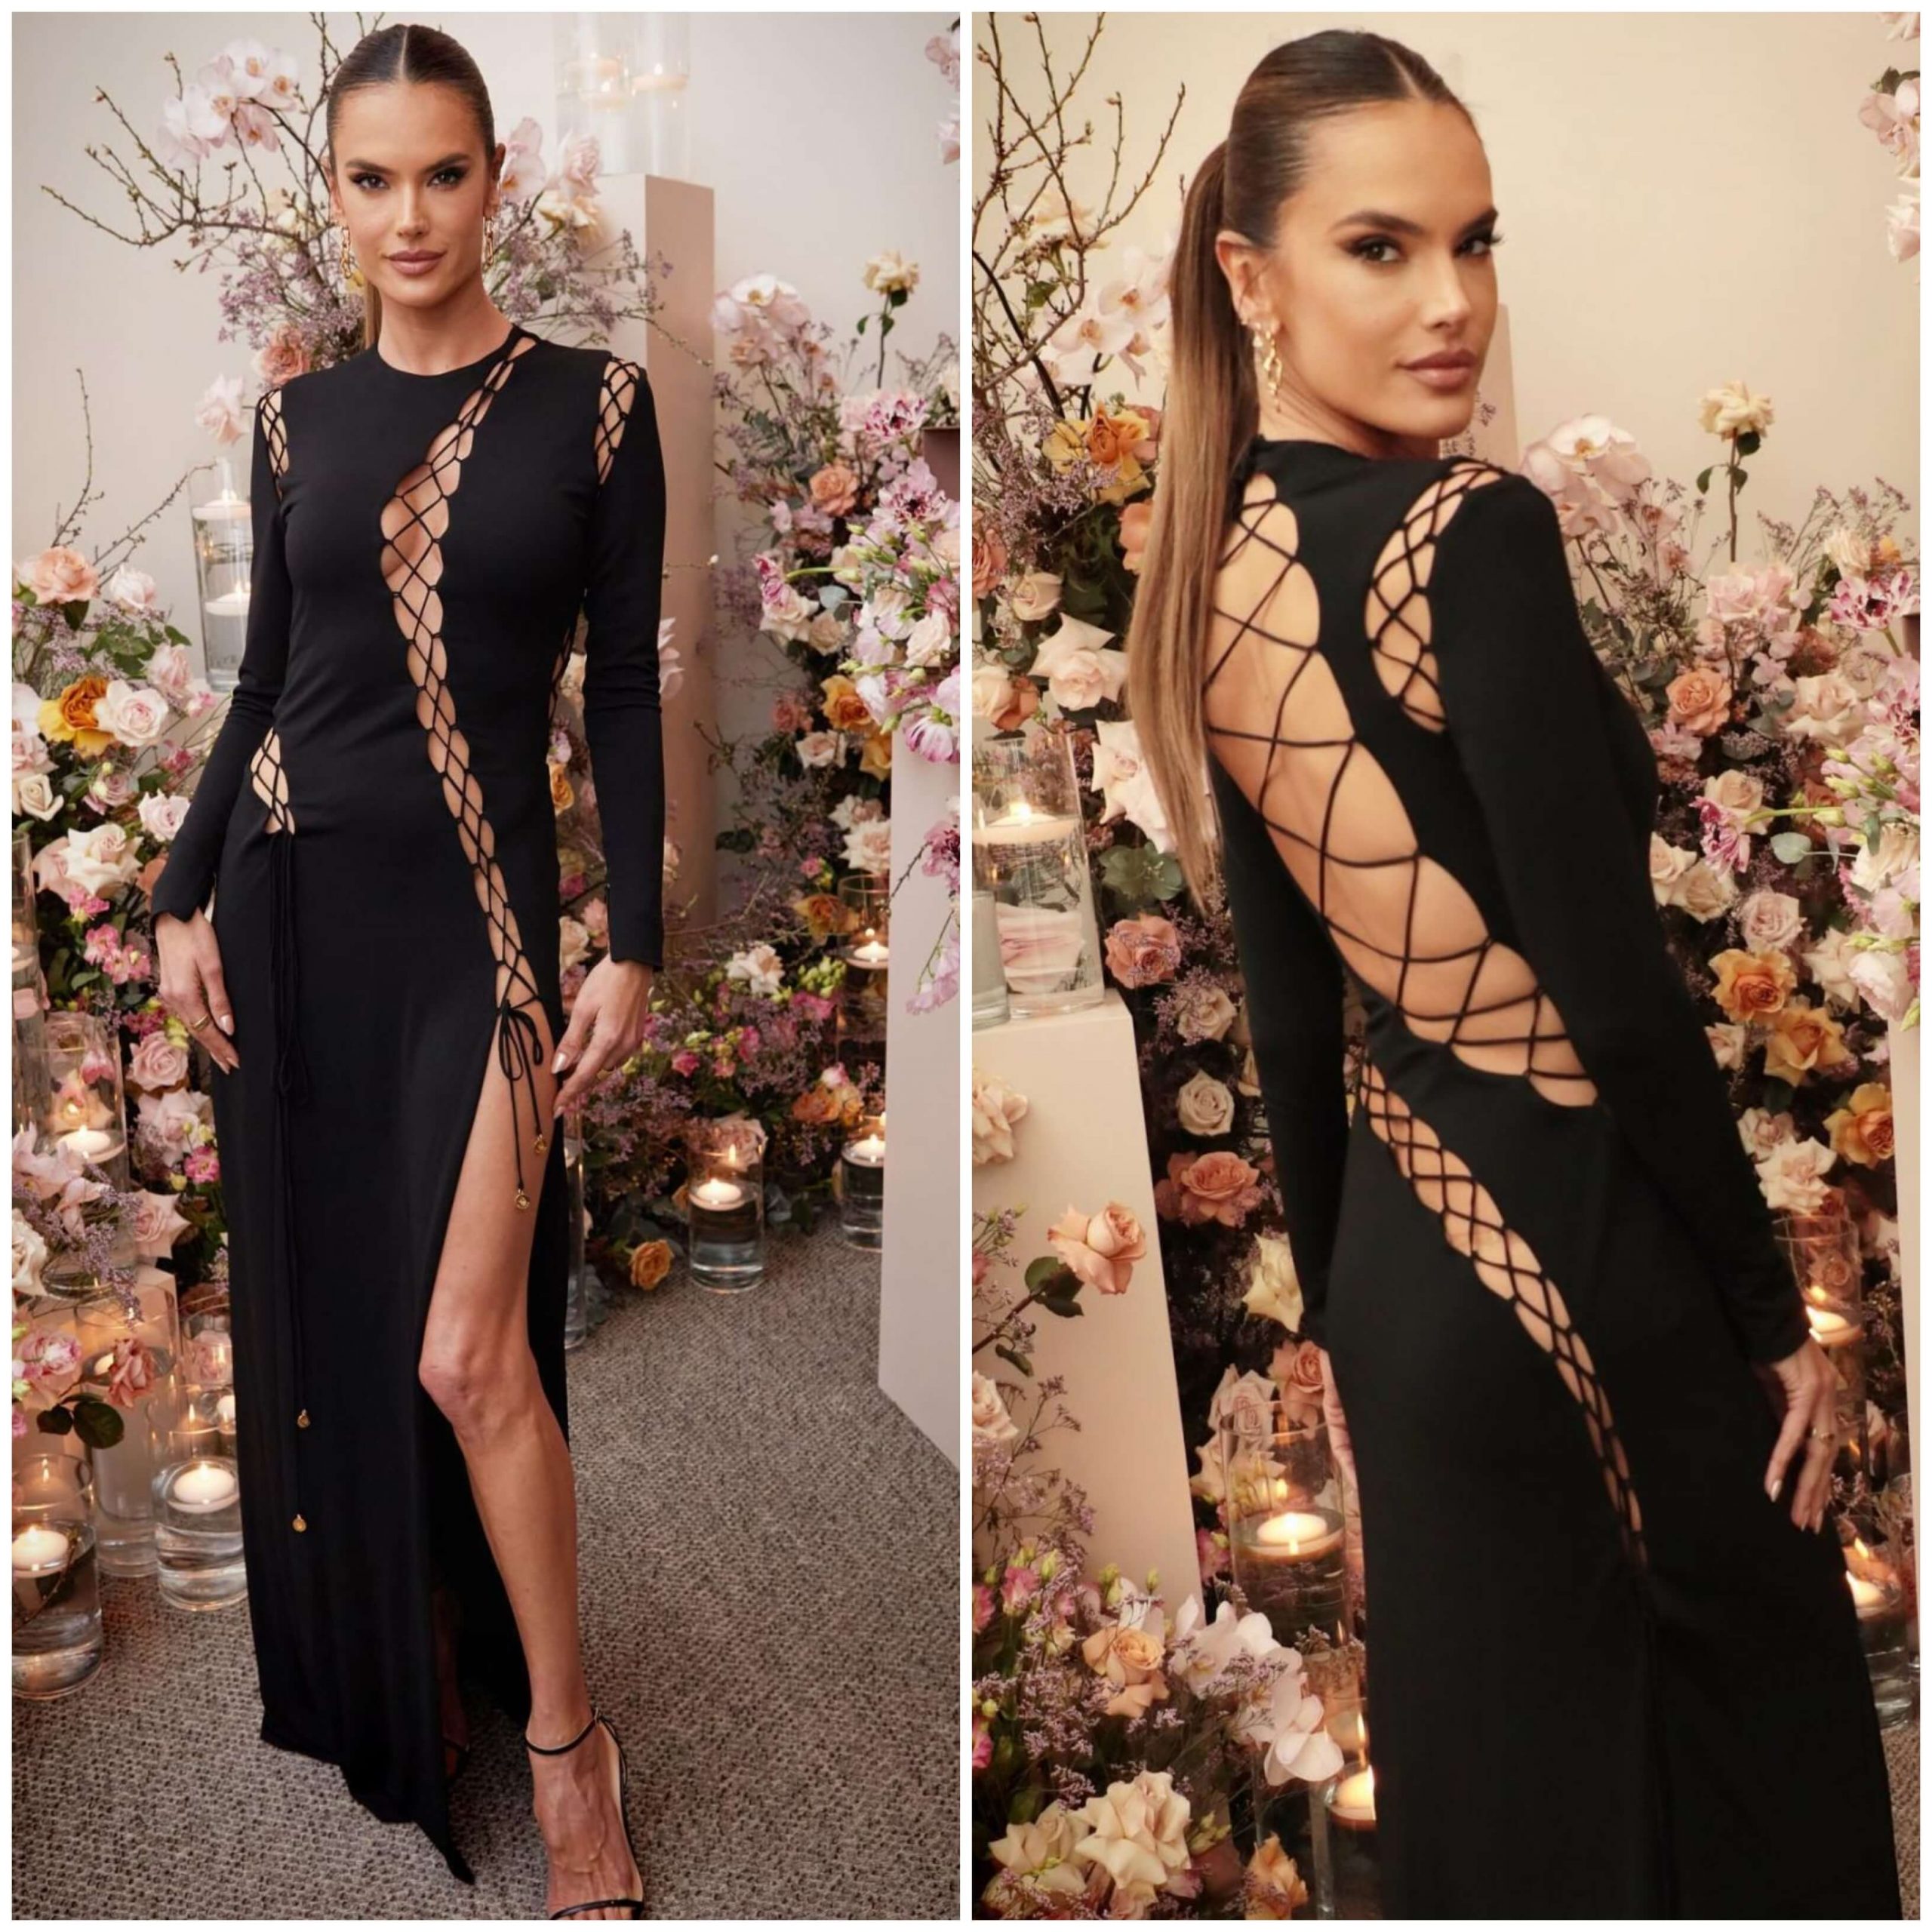 Alessandra Ambrosio  - In  Full Sleeves  Slit Cut Gown Outfit